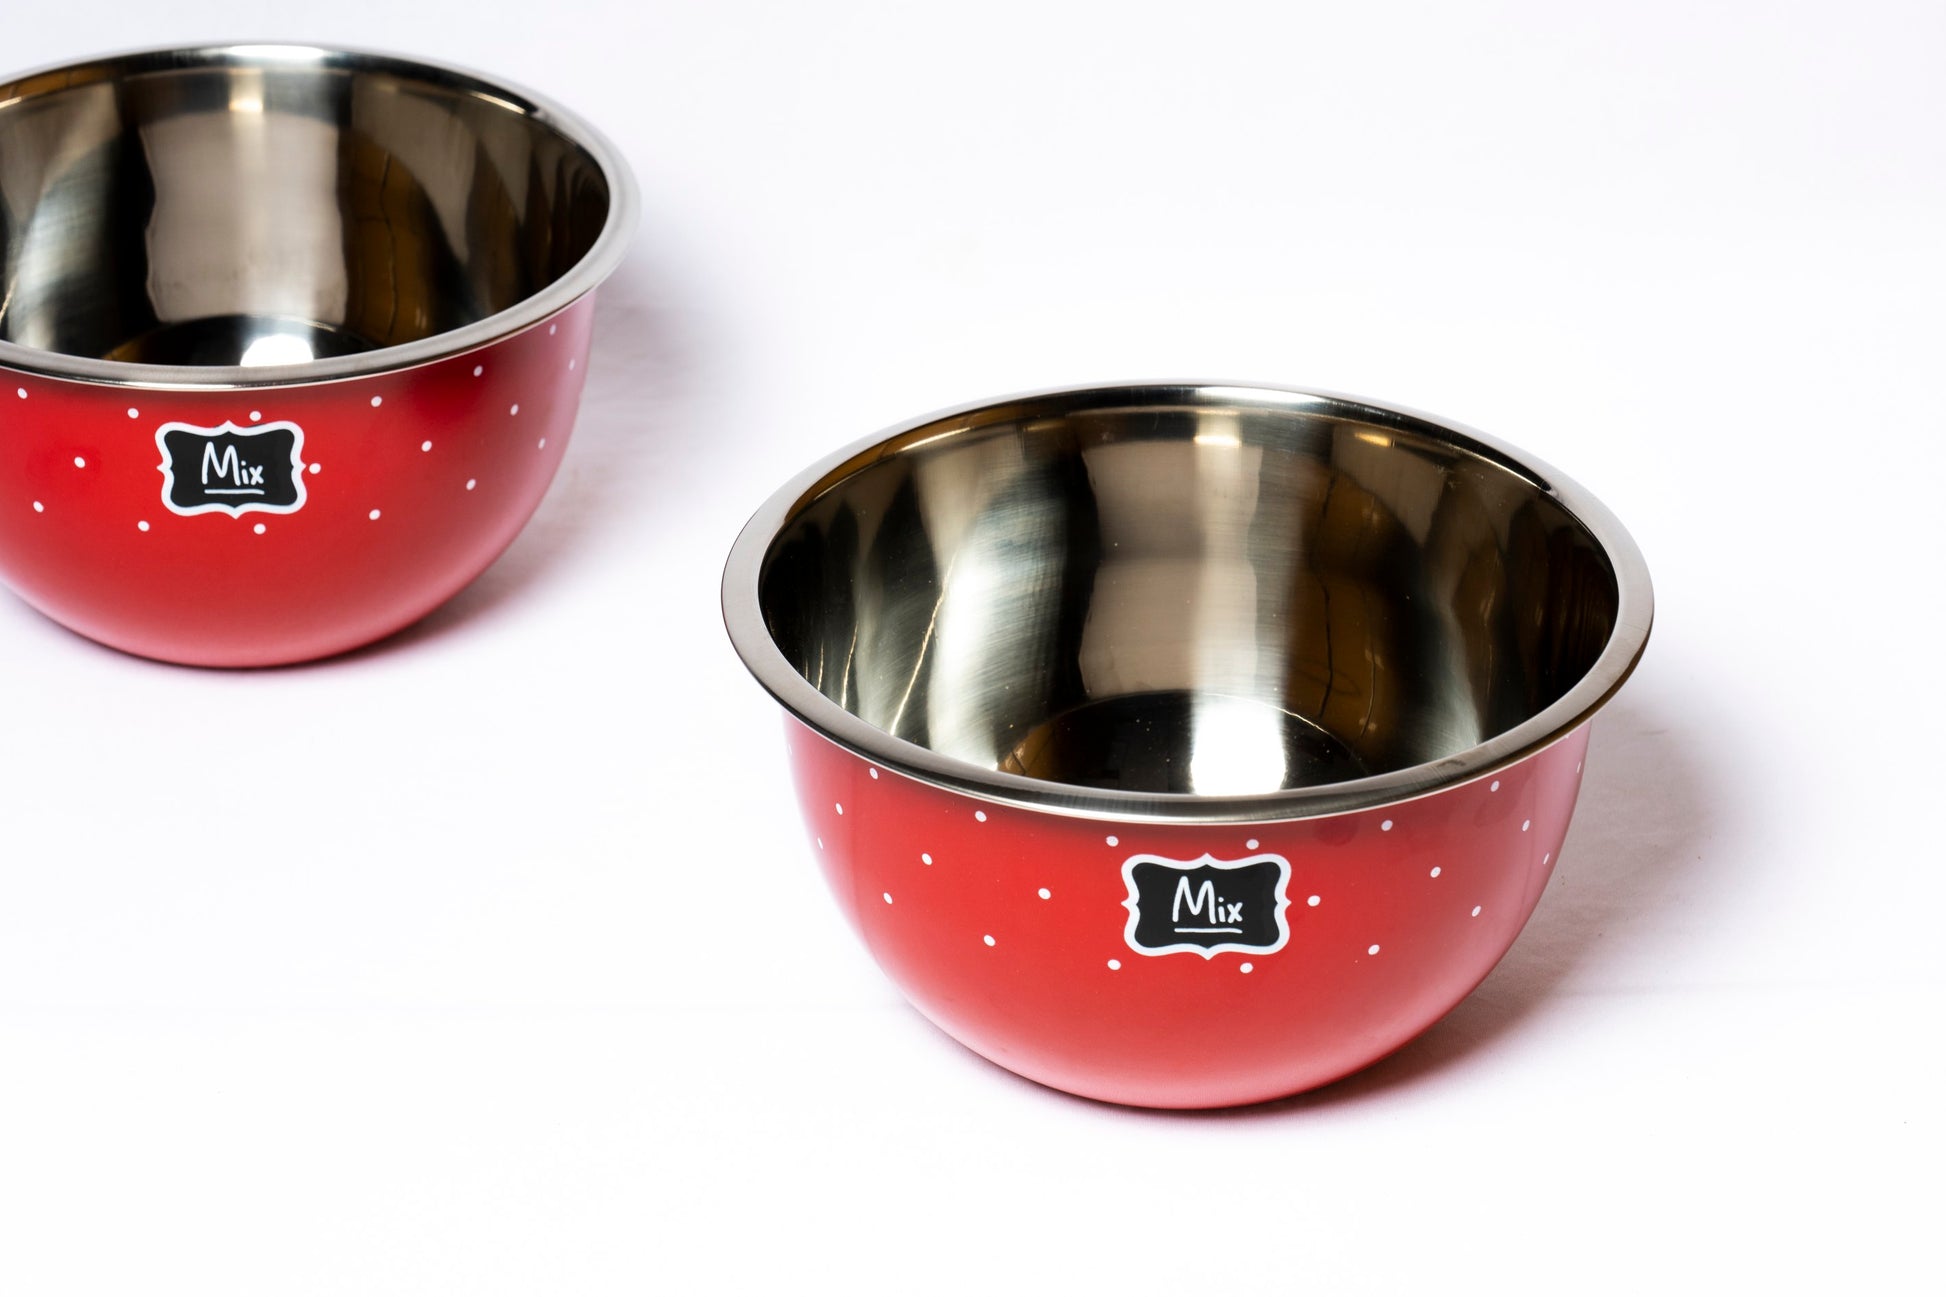 Polka Dot Steel Mixing Bowl (Red) - MBST0001 - View 5